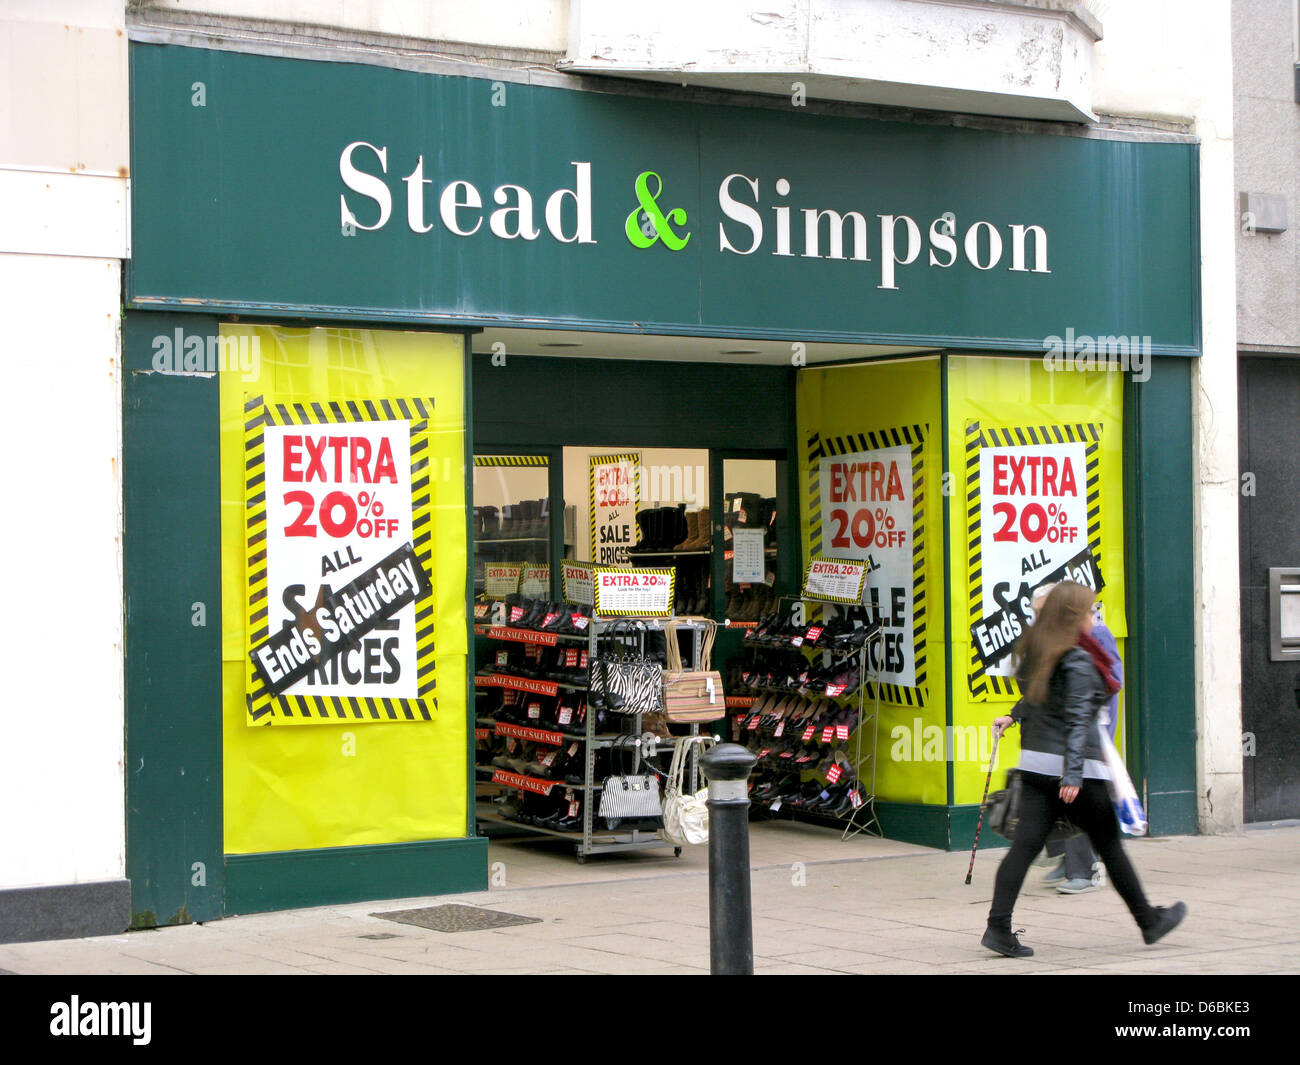 Stead & Simpson shoe shop Worthing West Sussex UK Stock Photo